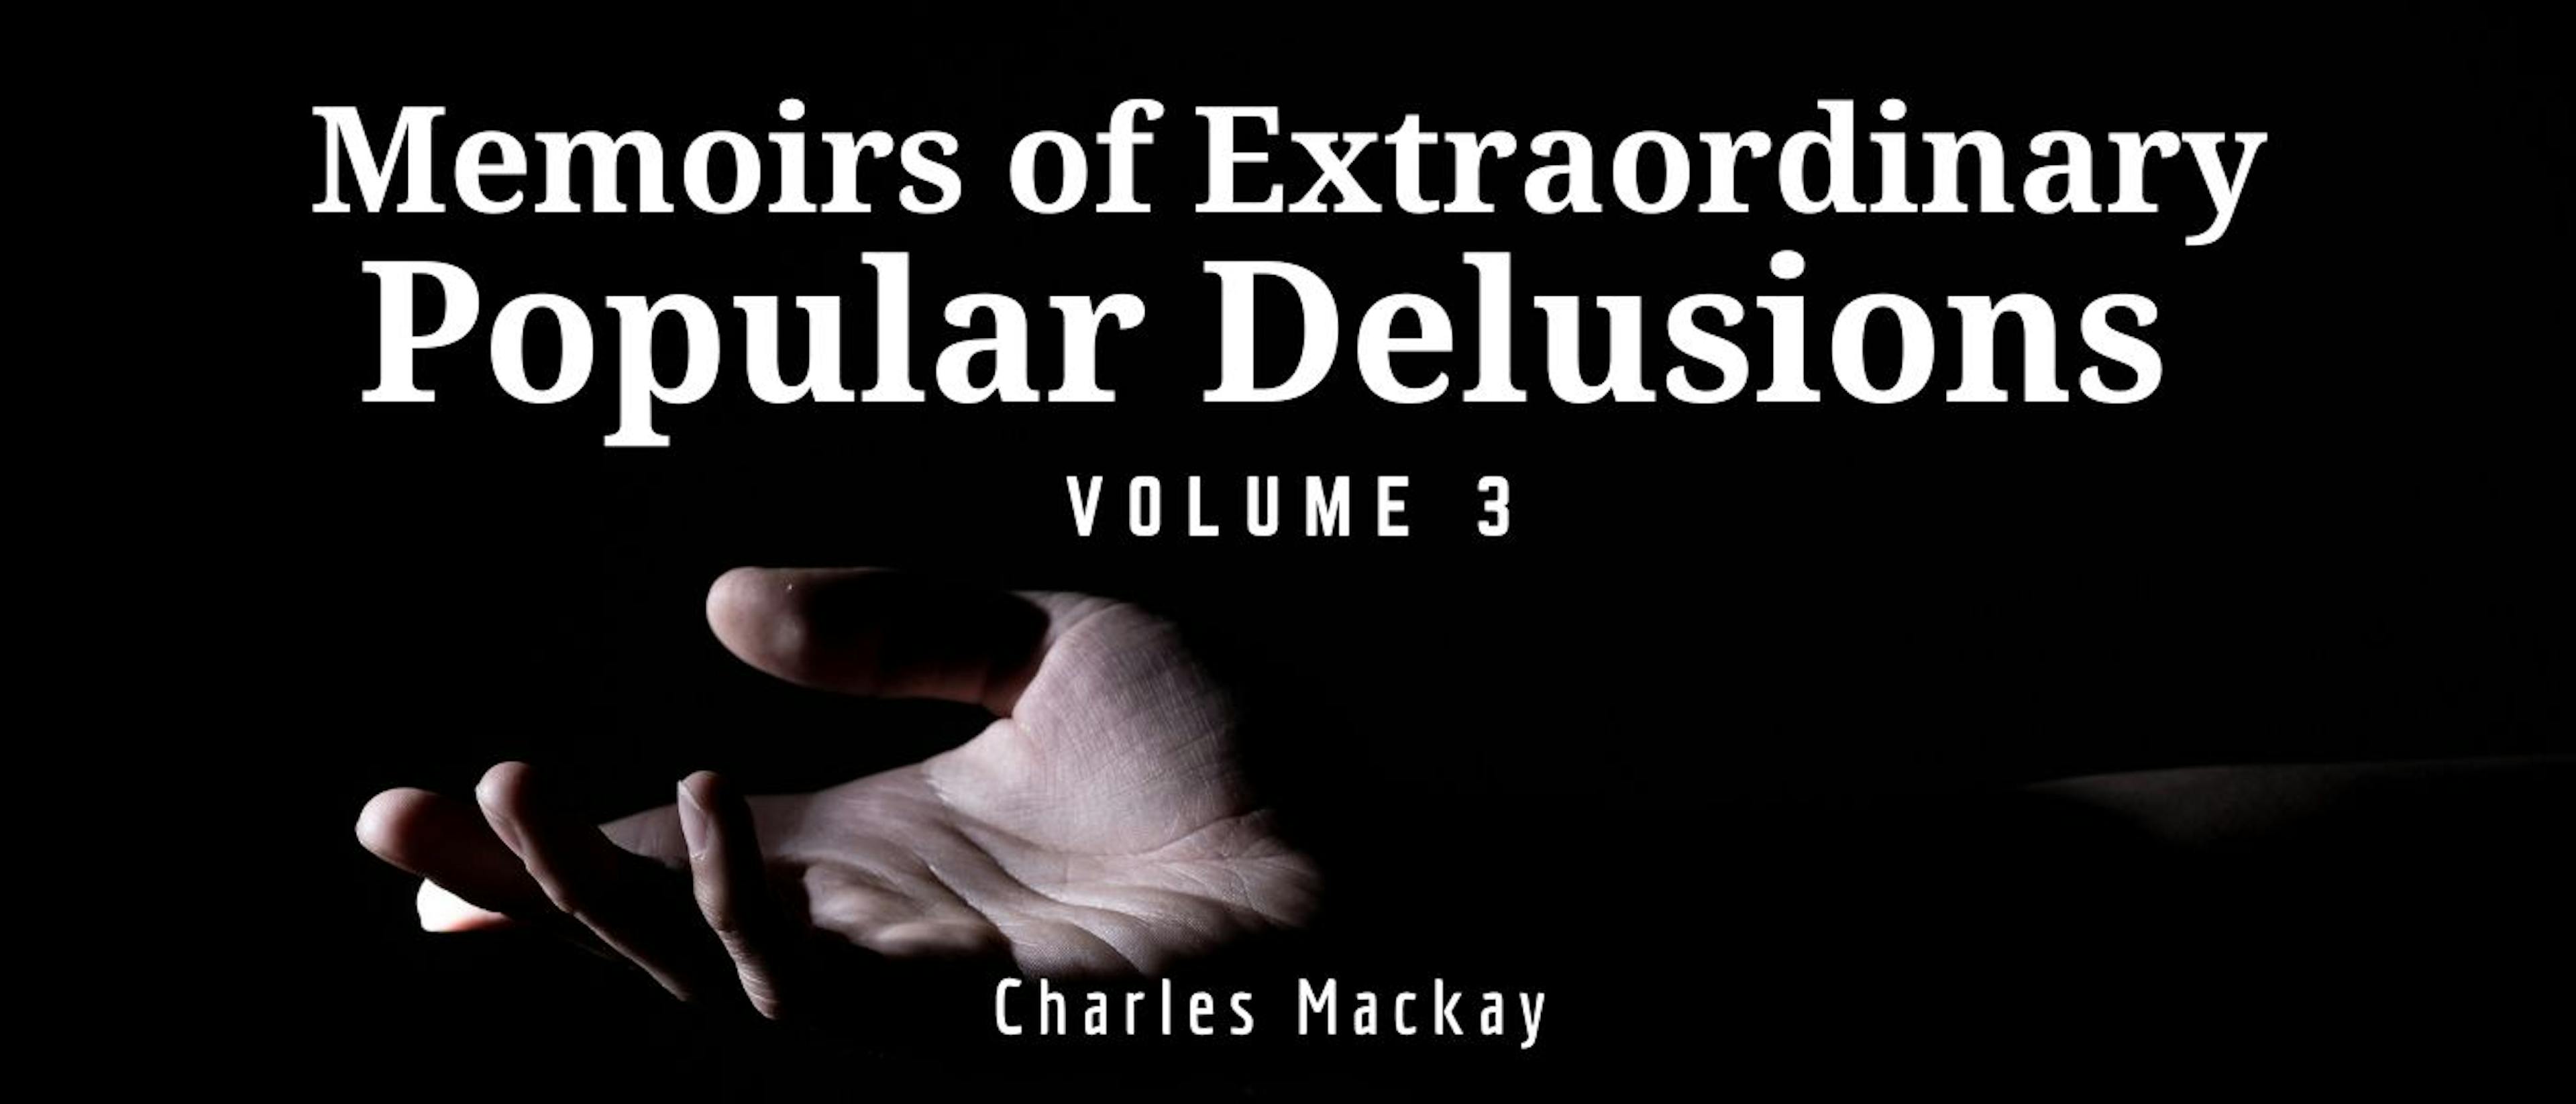 featured image - Memoirs of Extraordinary Popular Delusions — Volume III by Charles Mackay - Table of Links